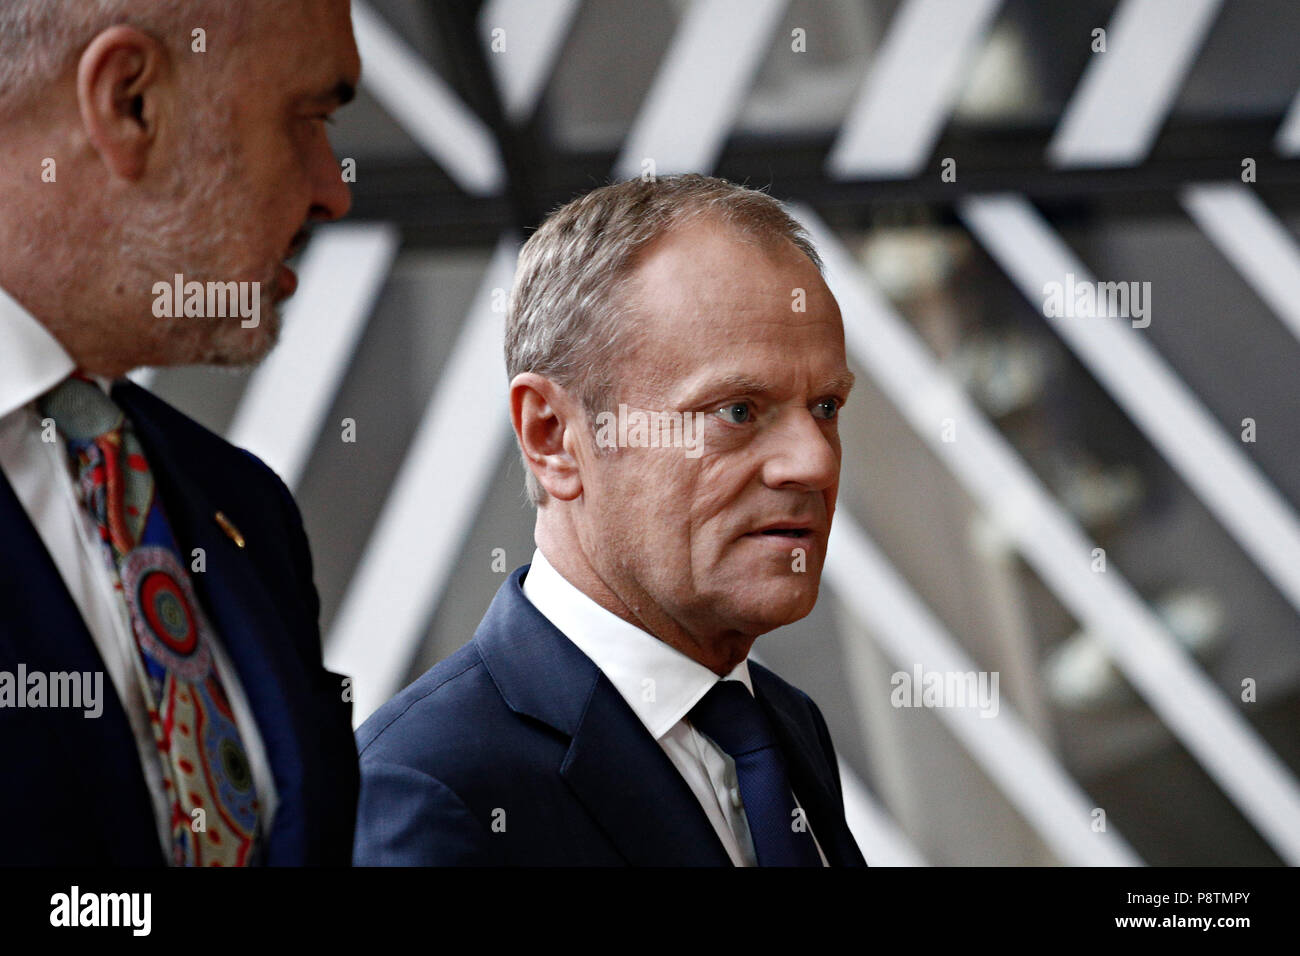 Brussels, Belgium. 13th July, 2018. Donald Tusk, the President of the European Council welcomes the Prime Minister of Albania Edi Rama at European Council headquarters. Alexandros Michailidis/Alamy Live News Stock Photo